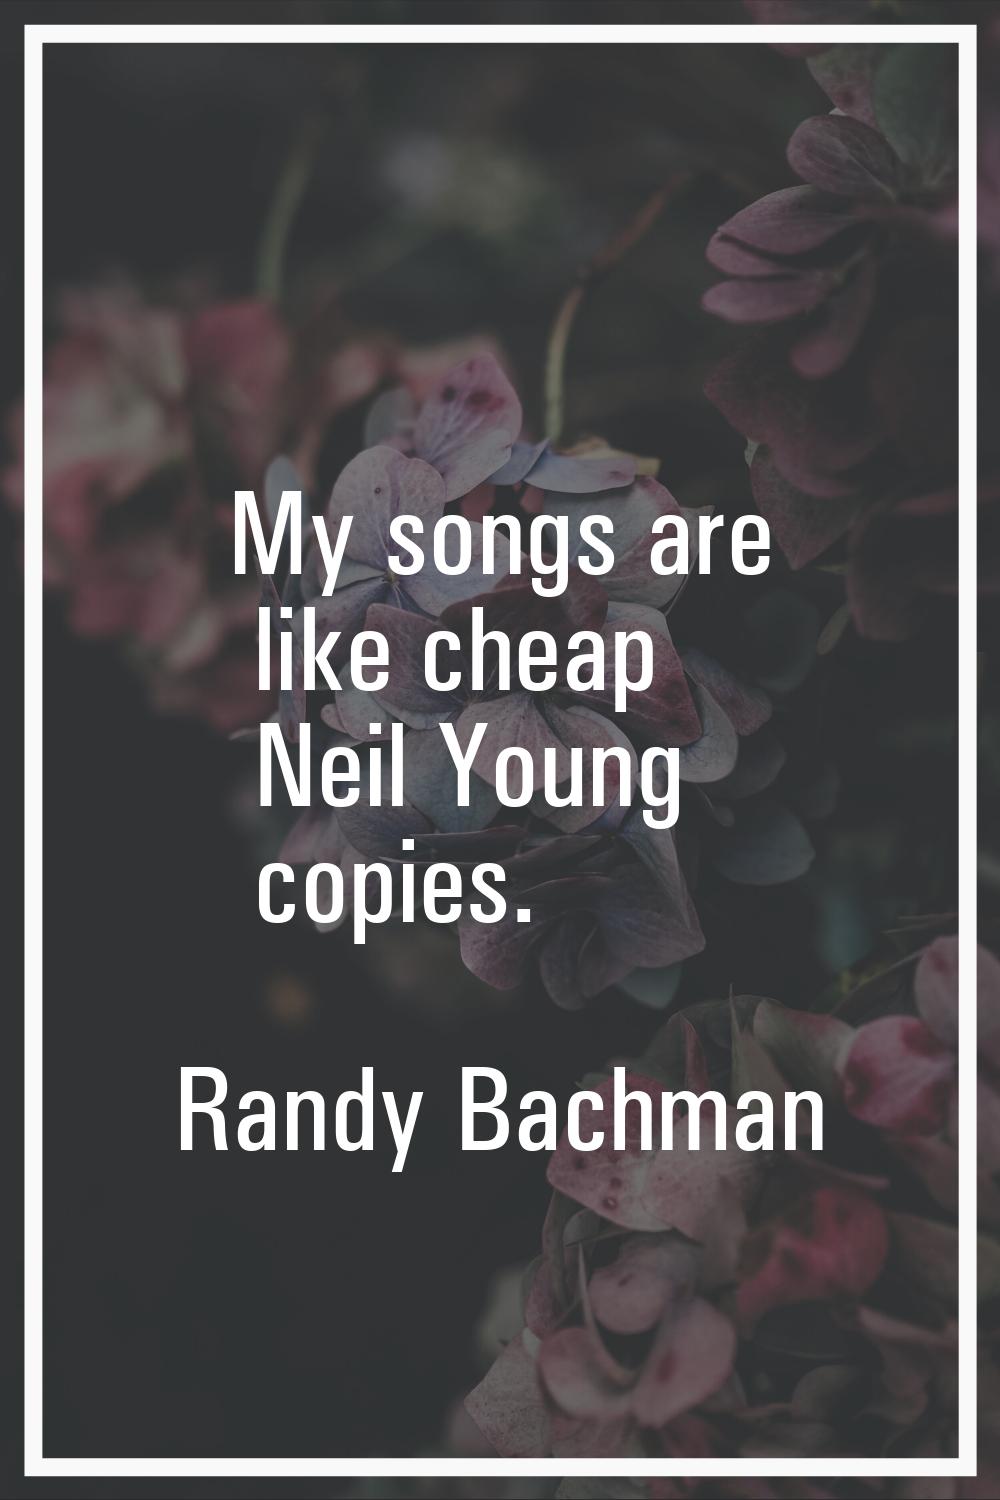 My songs are like cheap Neil Young copies.